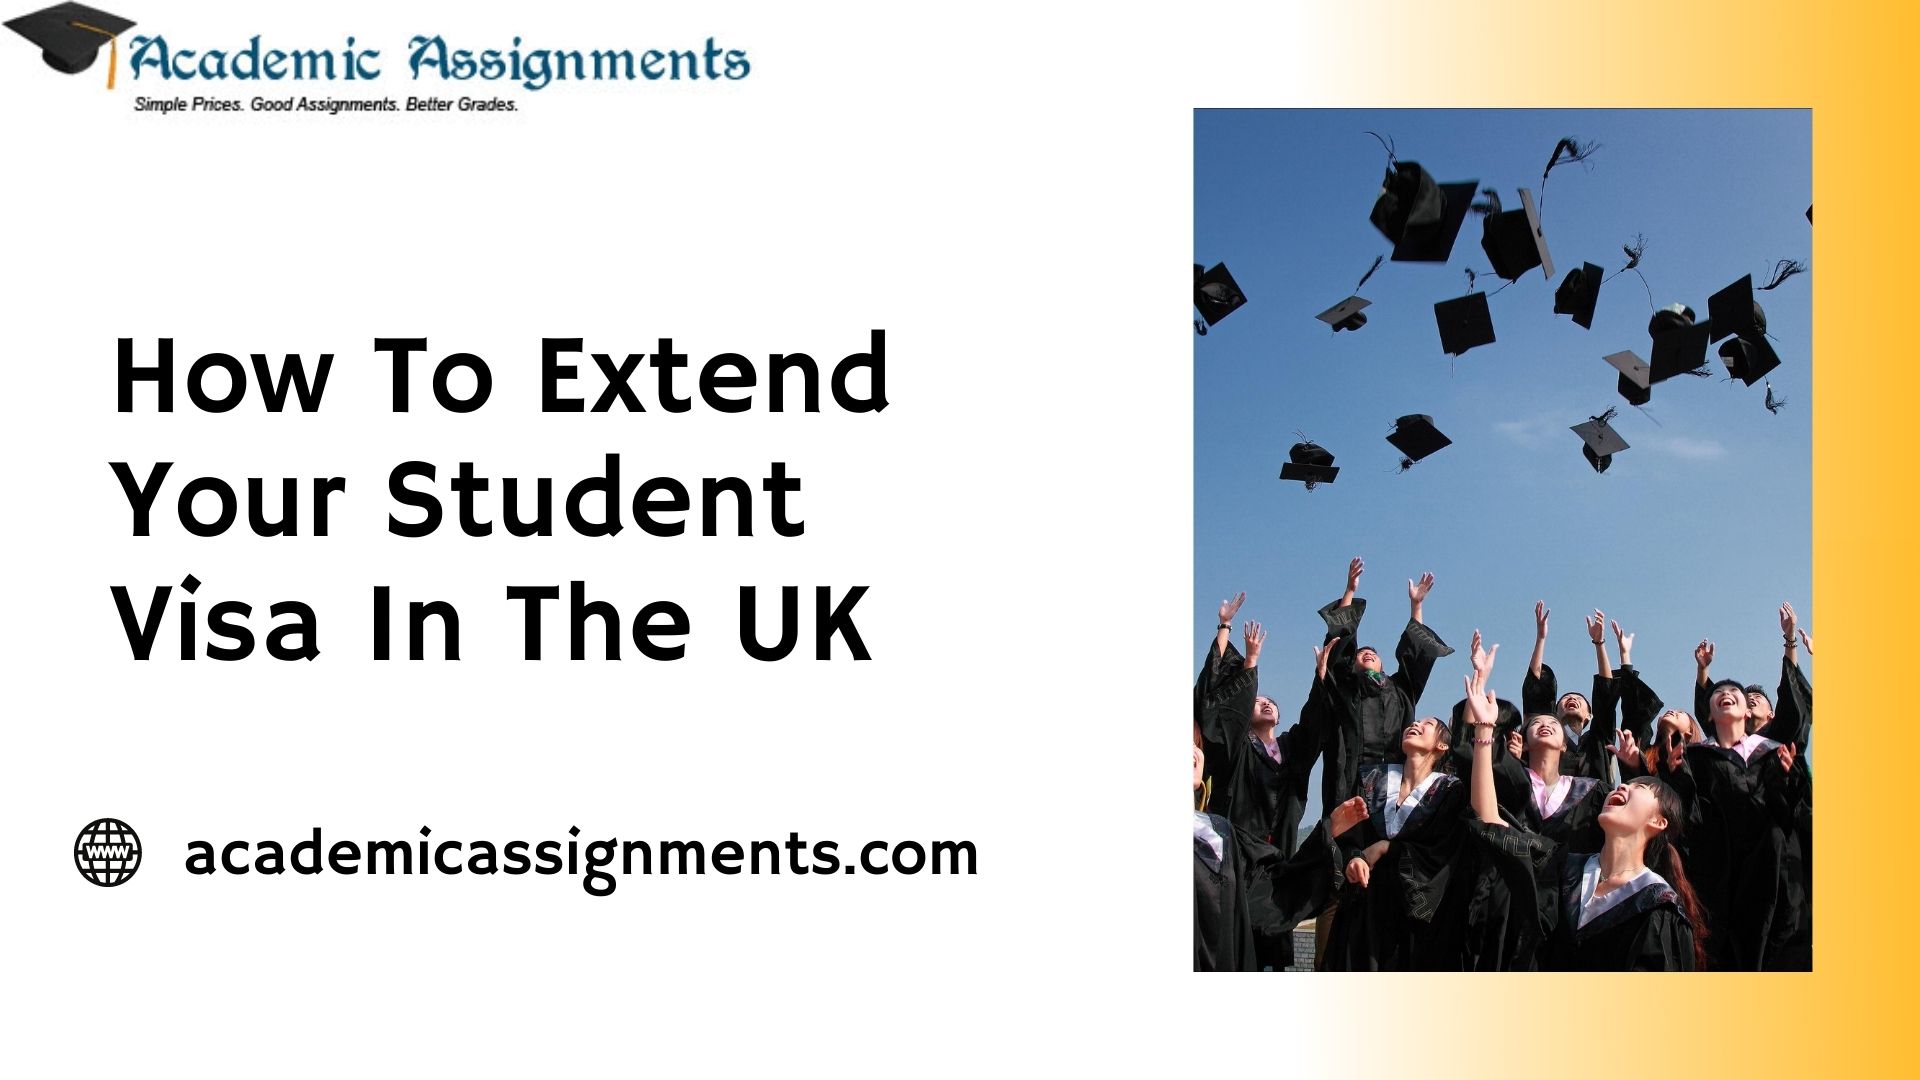 How To Extend Your Student Visa In The UK